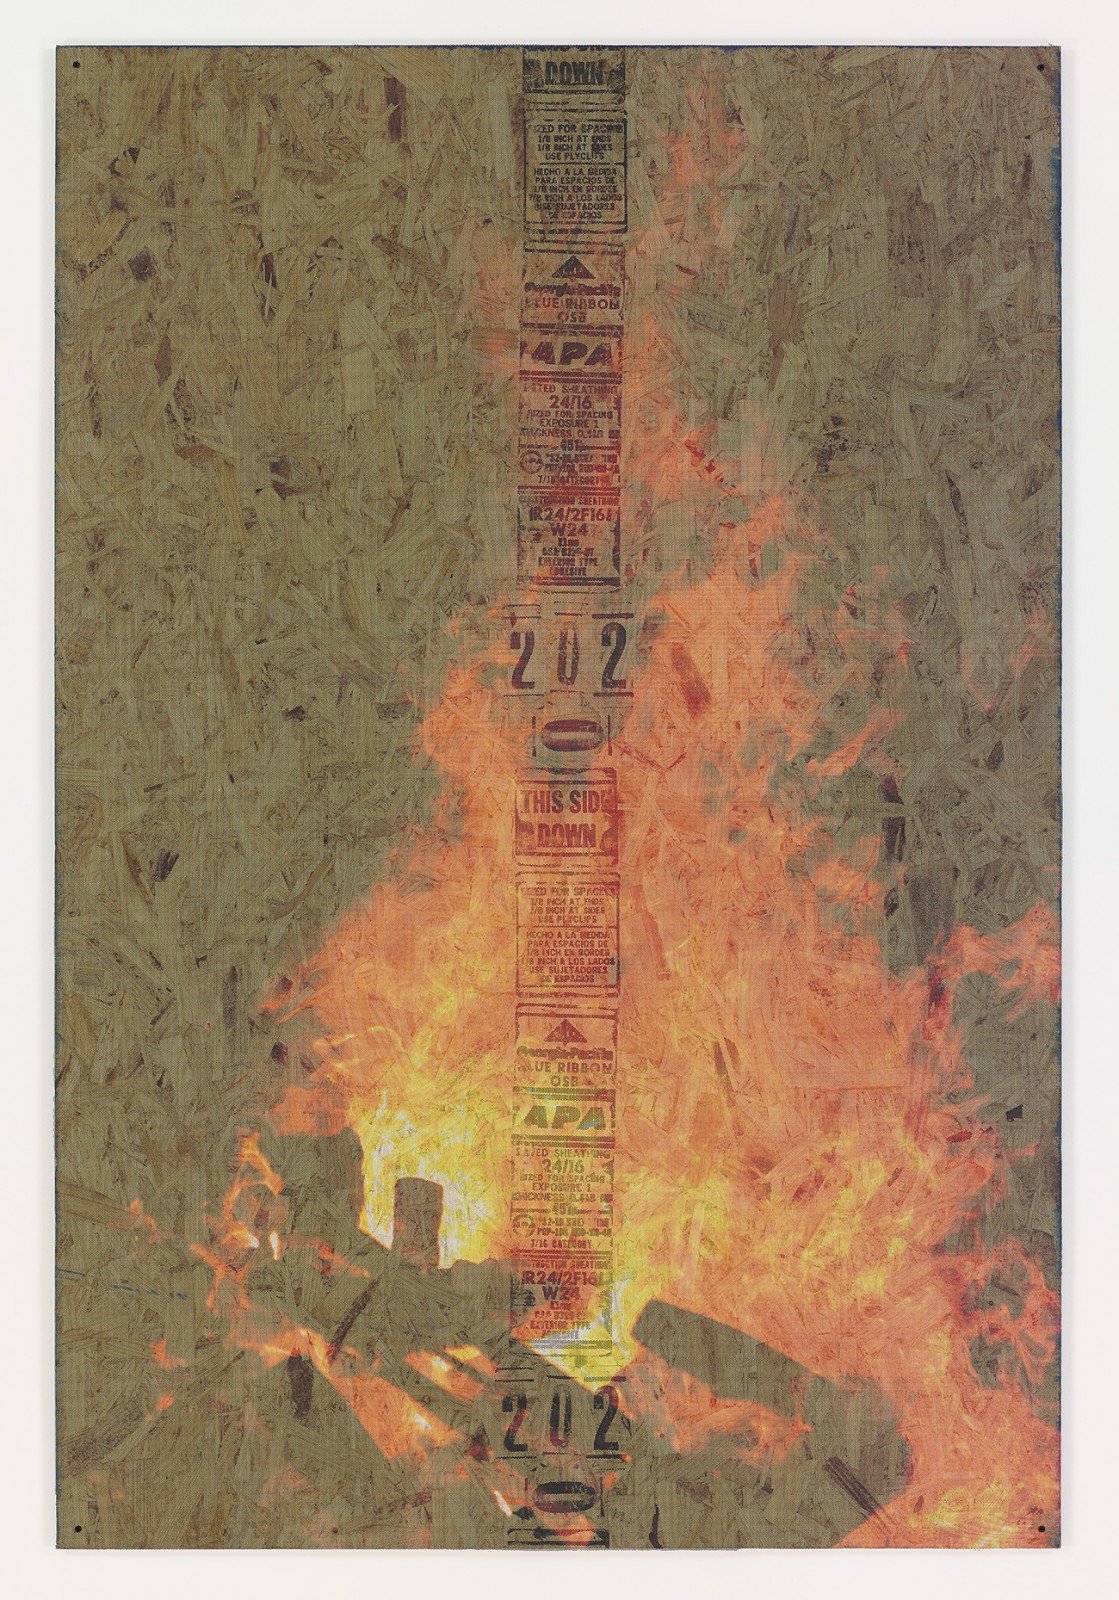 Peter Sutherland, Bonfire 4, 2014. Inkjet on perforated vinyl adhered to OSB, 72 x 48 inches.